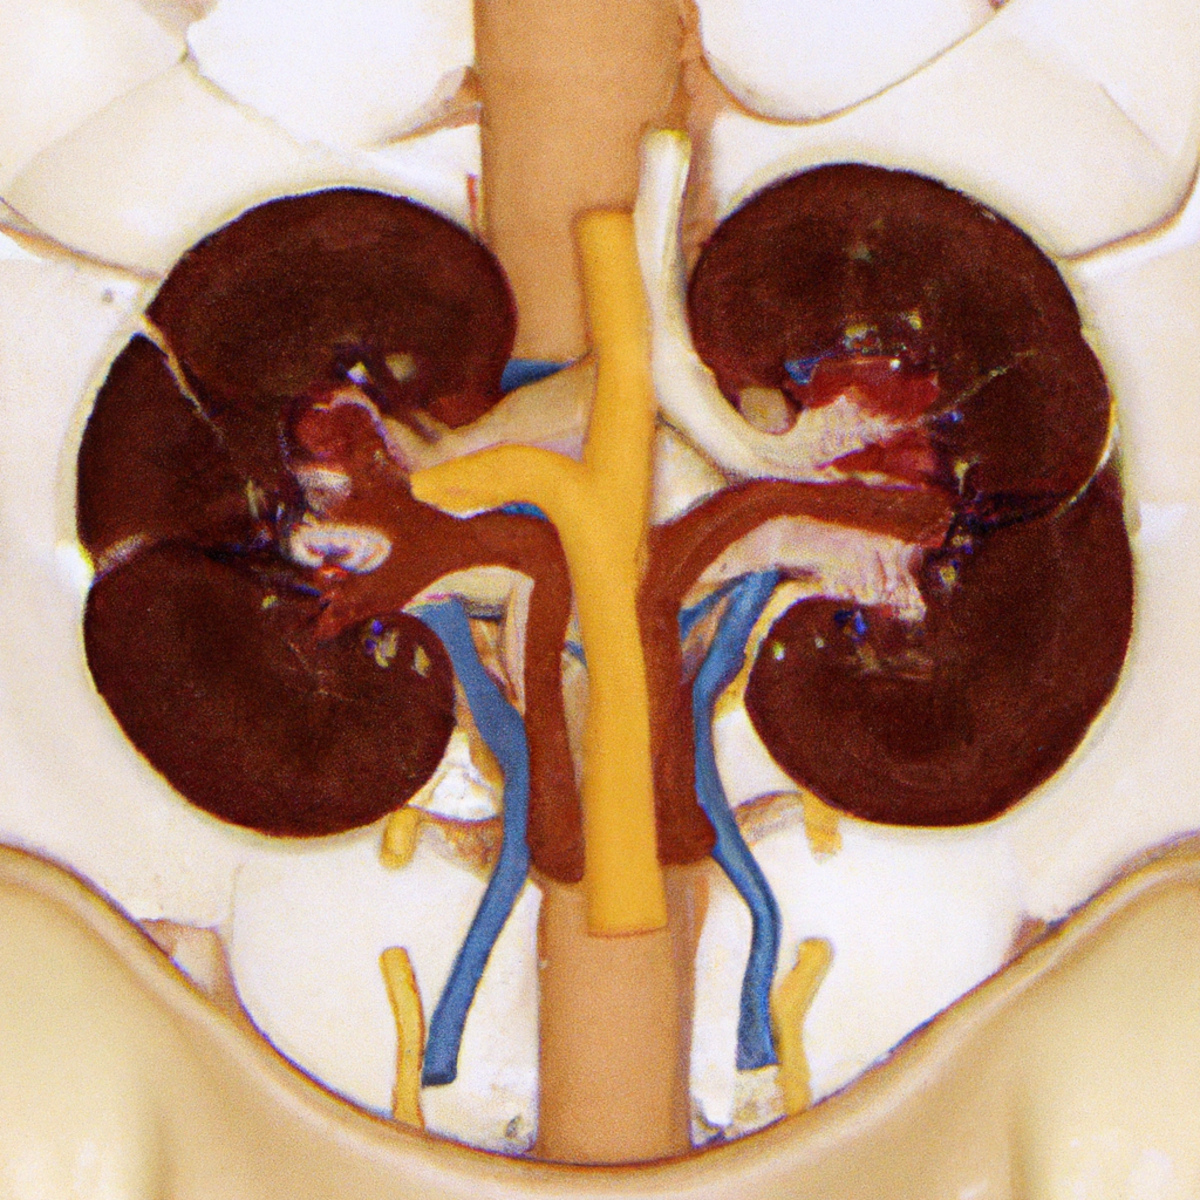 Close-up photo of kidney model showcasing intricate structure and components, highlighting complexity of kidneys in Gitelman Syndrome.